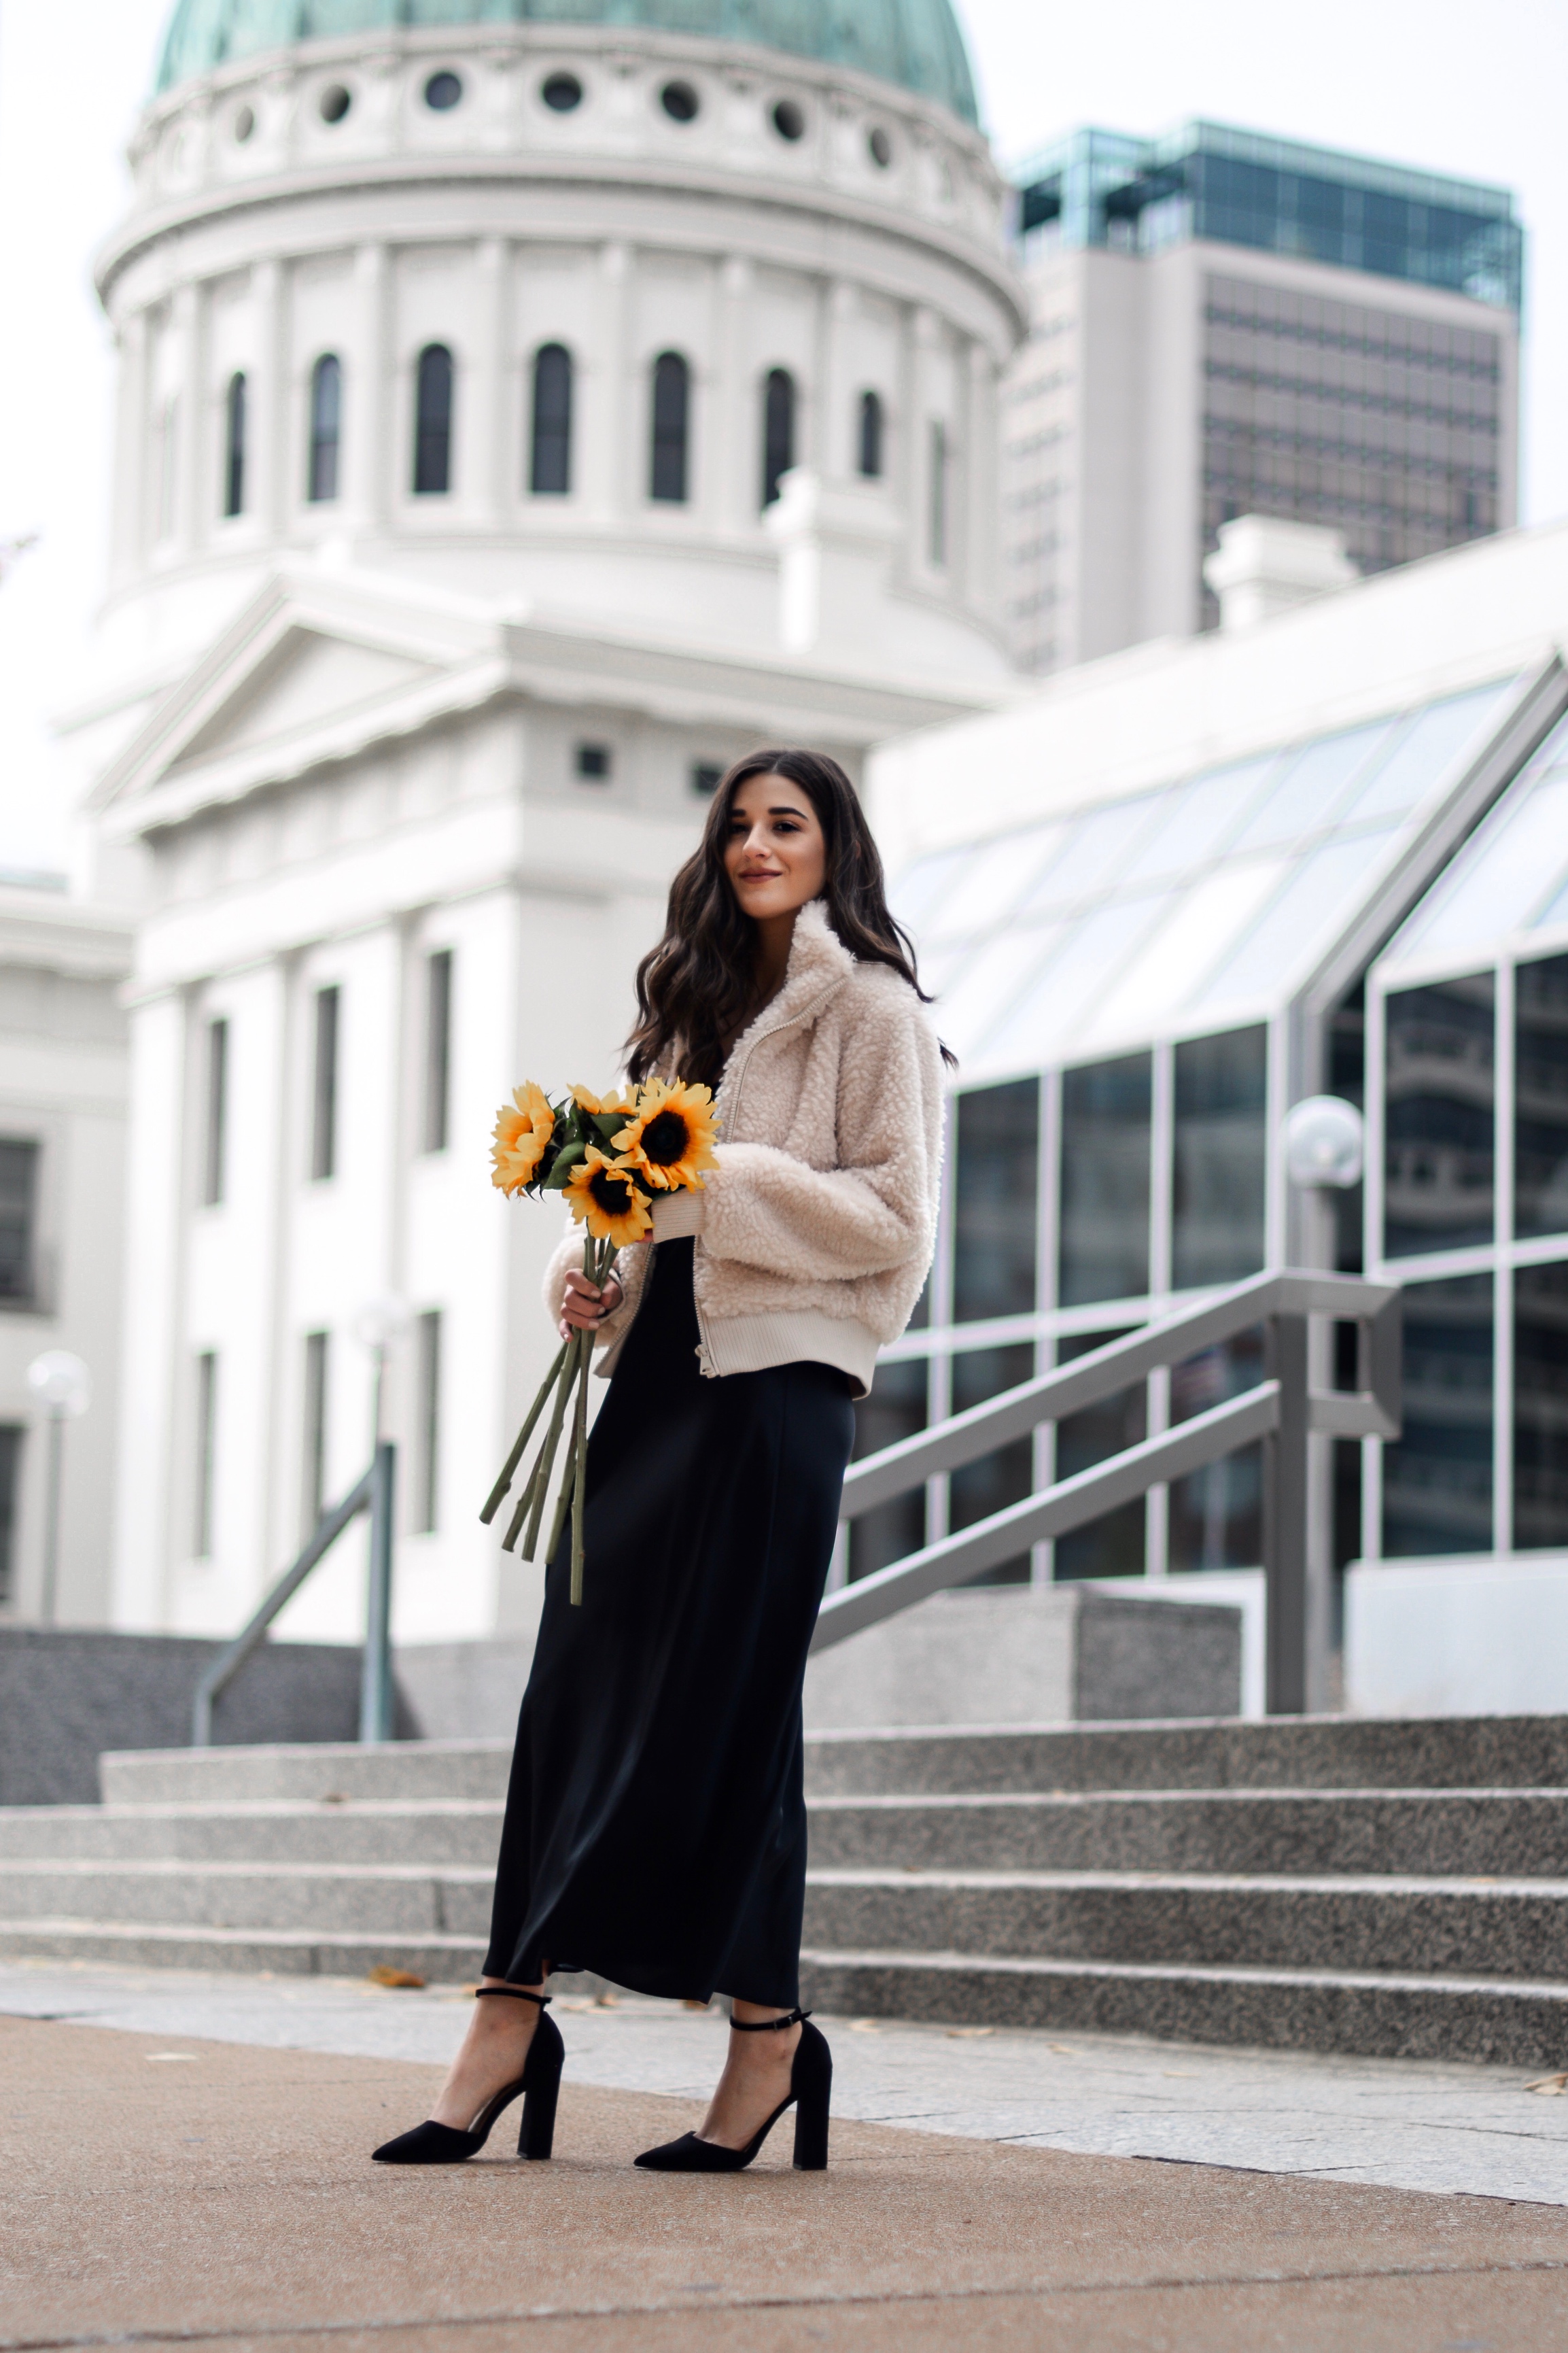 The 10 Most Frustrating Parts Of Brand Collabs Long Black Slip Dress Shearling Jacket Esther Santer Fashion Blog NYC Street Style Blogger Outfit OOTD Trendy Shopping St. Louis Photoshoot Hometown Downtown Saint Louis Sunflowers Yellow Flowers  Heels.jpg